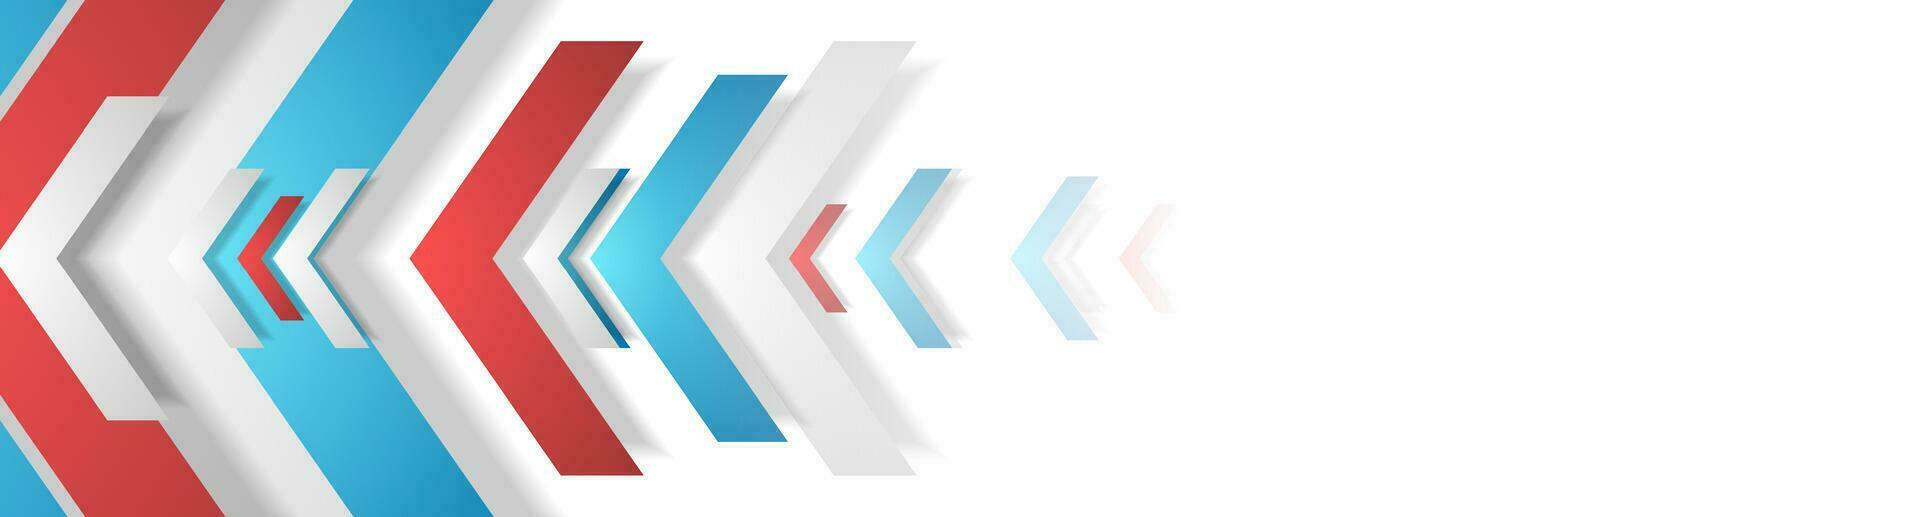 Technology abstract background with red and blue arrows vector